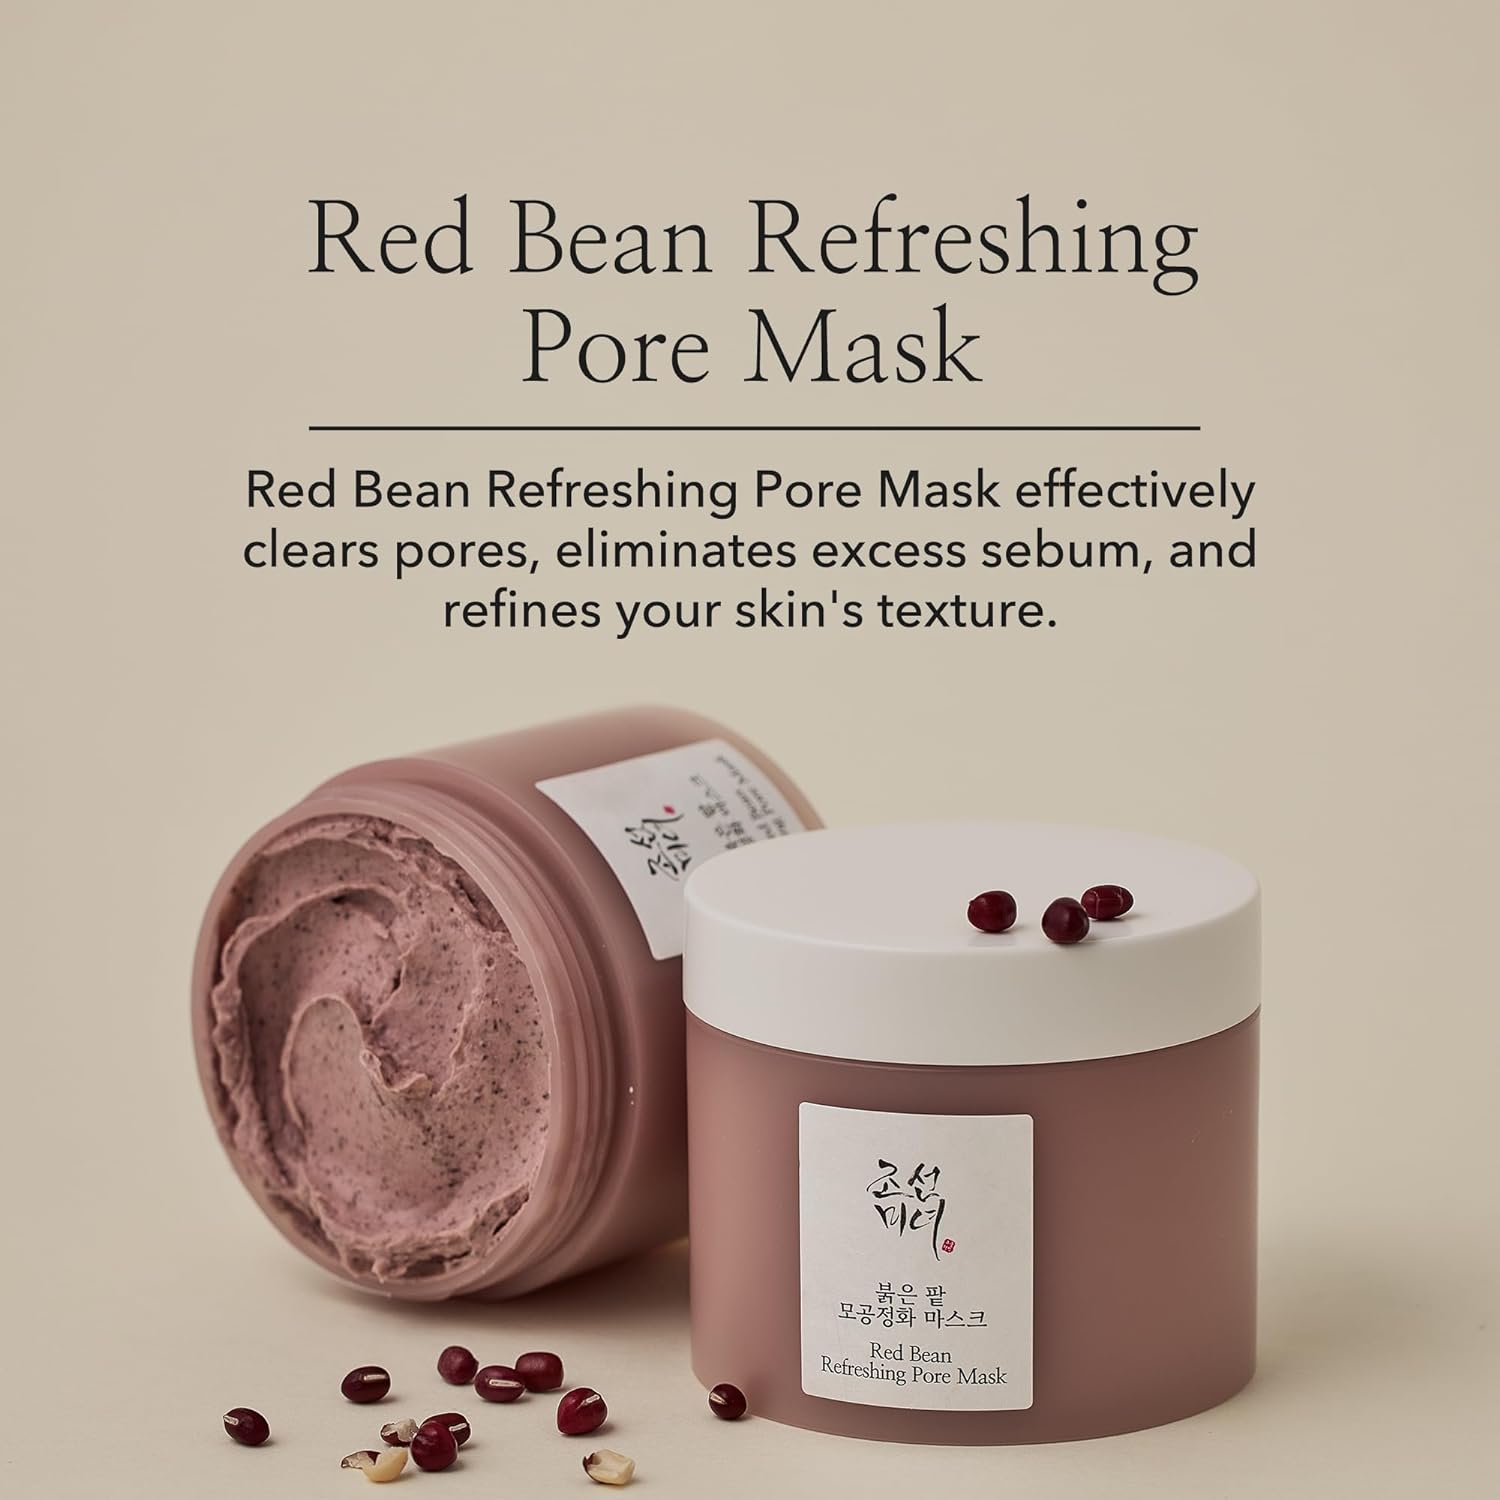 Beauty of Joseon Red Bean Refreshing Pore Mask 140ml, 4.73 Fl Oz (Pack of 1) - canavitam